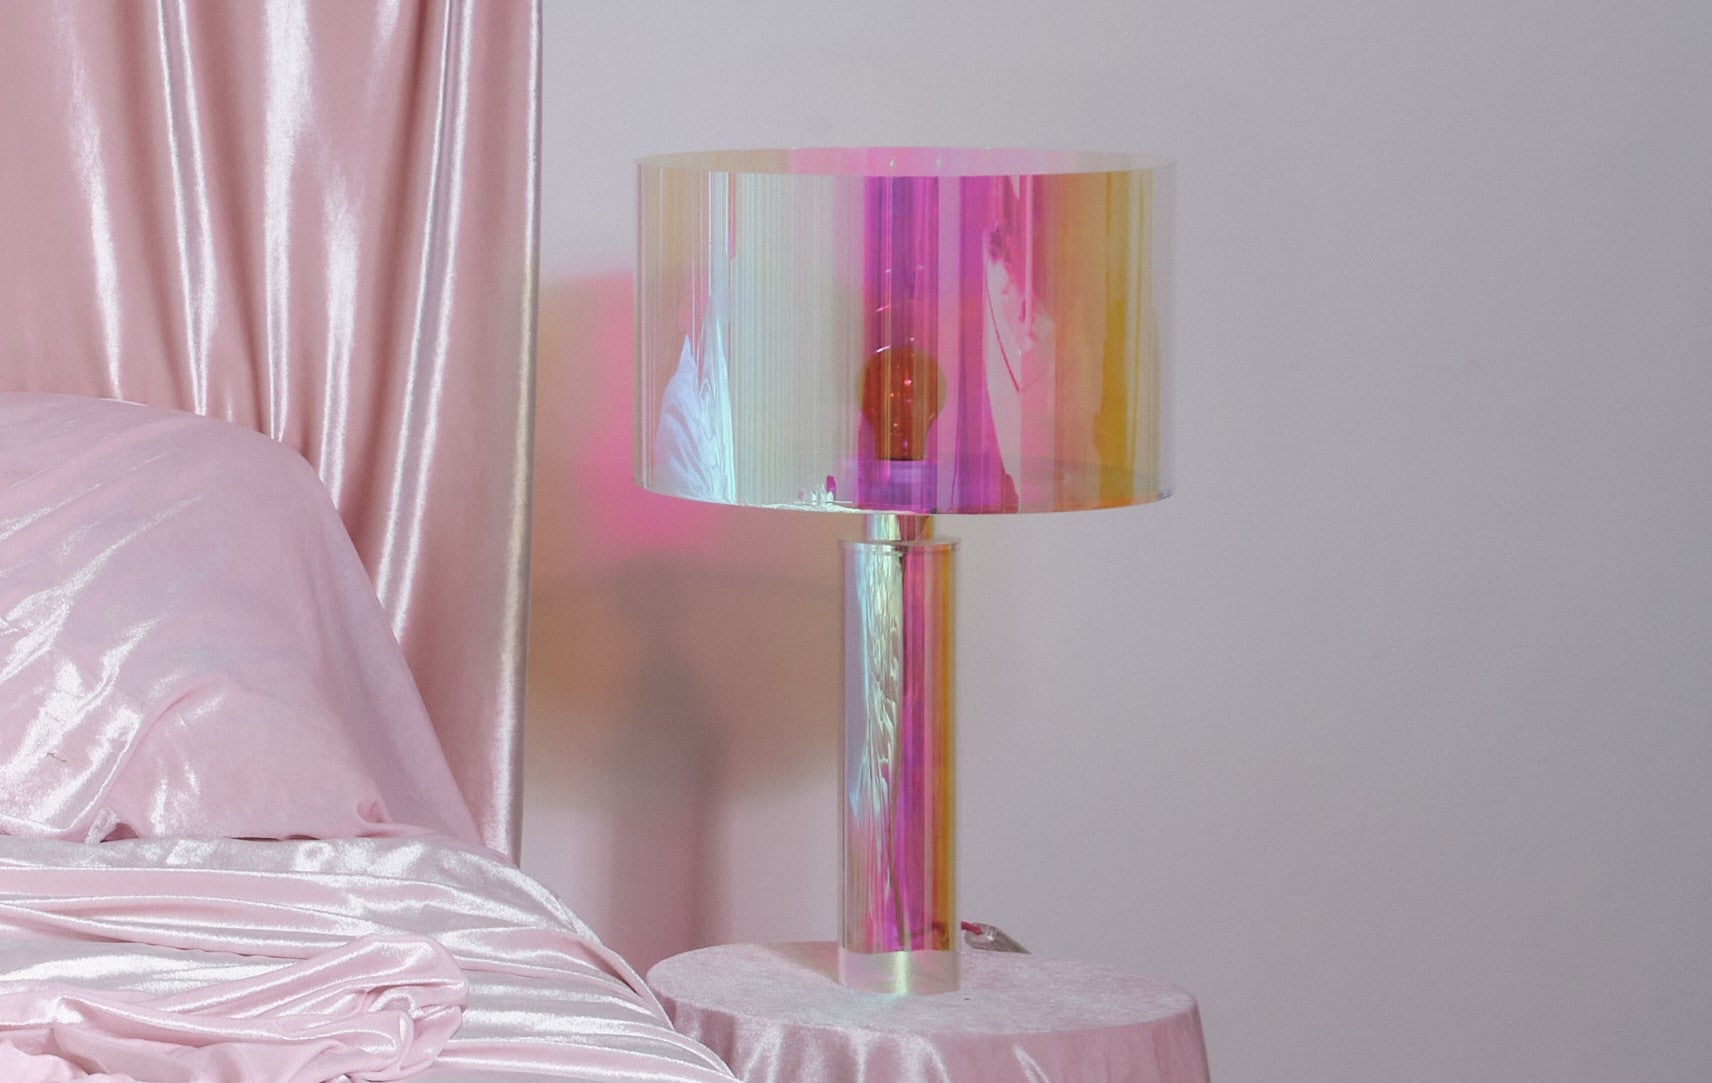 Miami pink table lamp by Brajak Vitberg
Materials: Plexiglass, Dichroic film
Dimensions: 55 x 35 cm

Minor bubbles can appear since this is a custom made product.

Bijelic and Brajak are two architects from Ljubljana, Slovenia.
They are